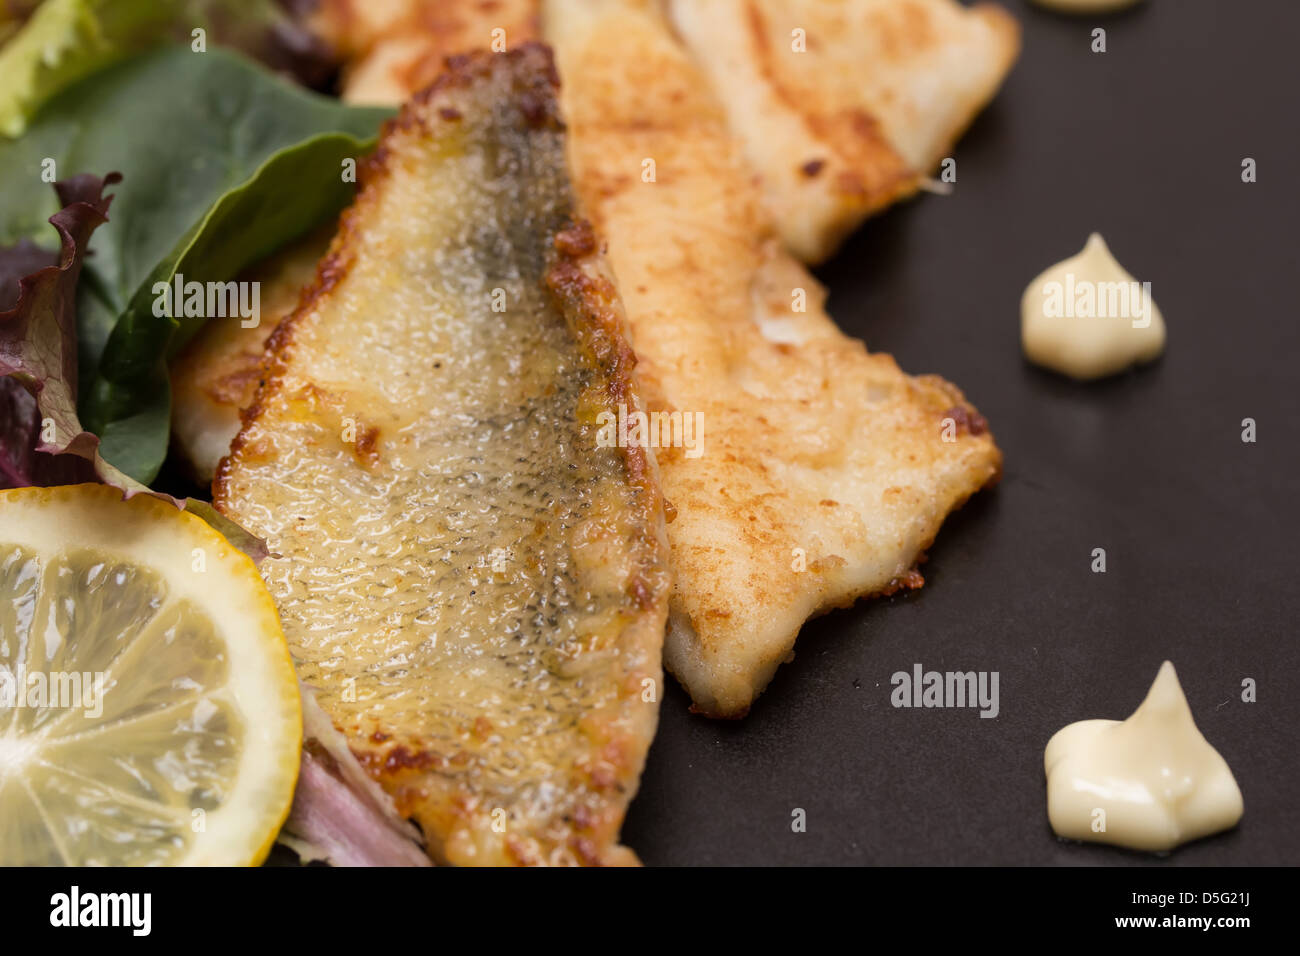 Fried perch fillets with potatoes, lemon and salad in a black plate Stock Photo